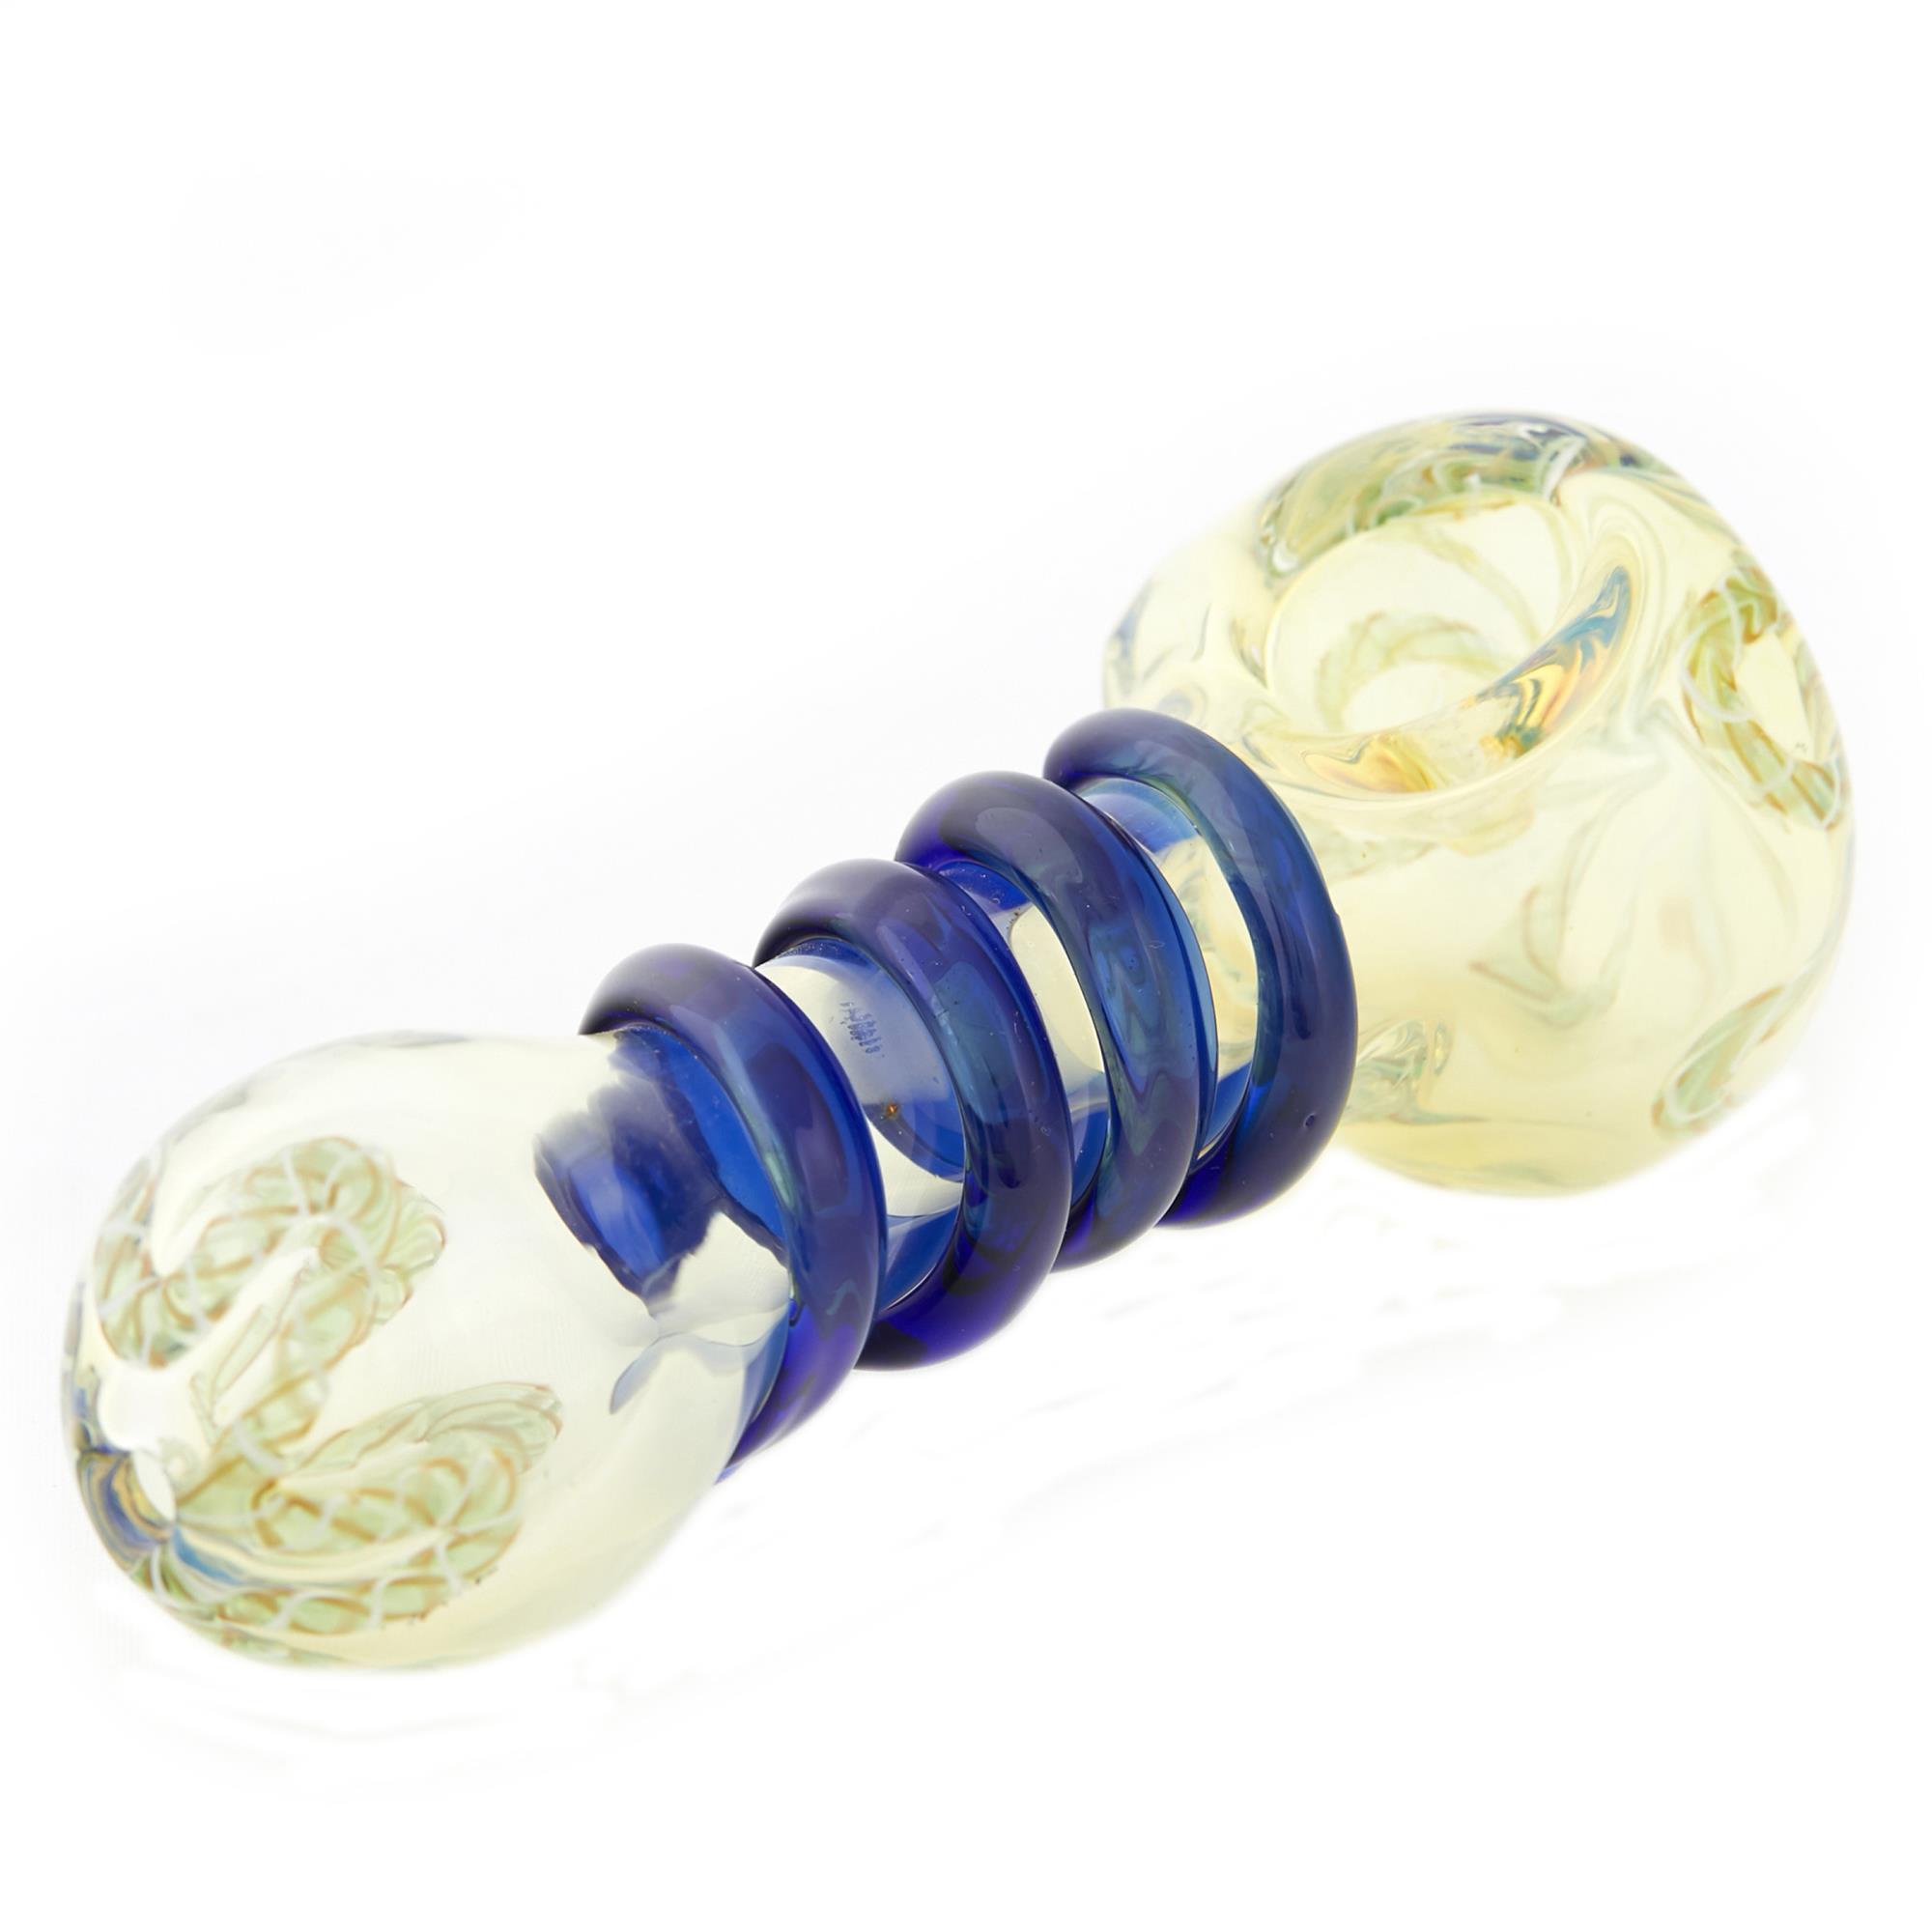 HIGH STATE OF MIND SPOON PIPE